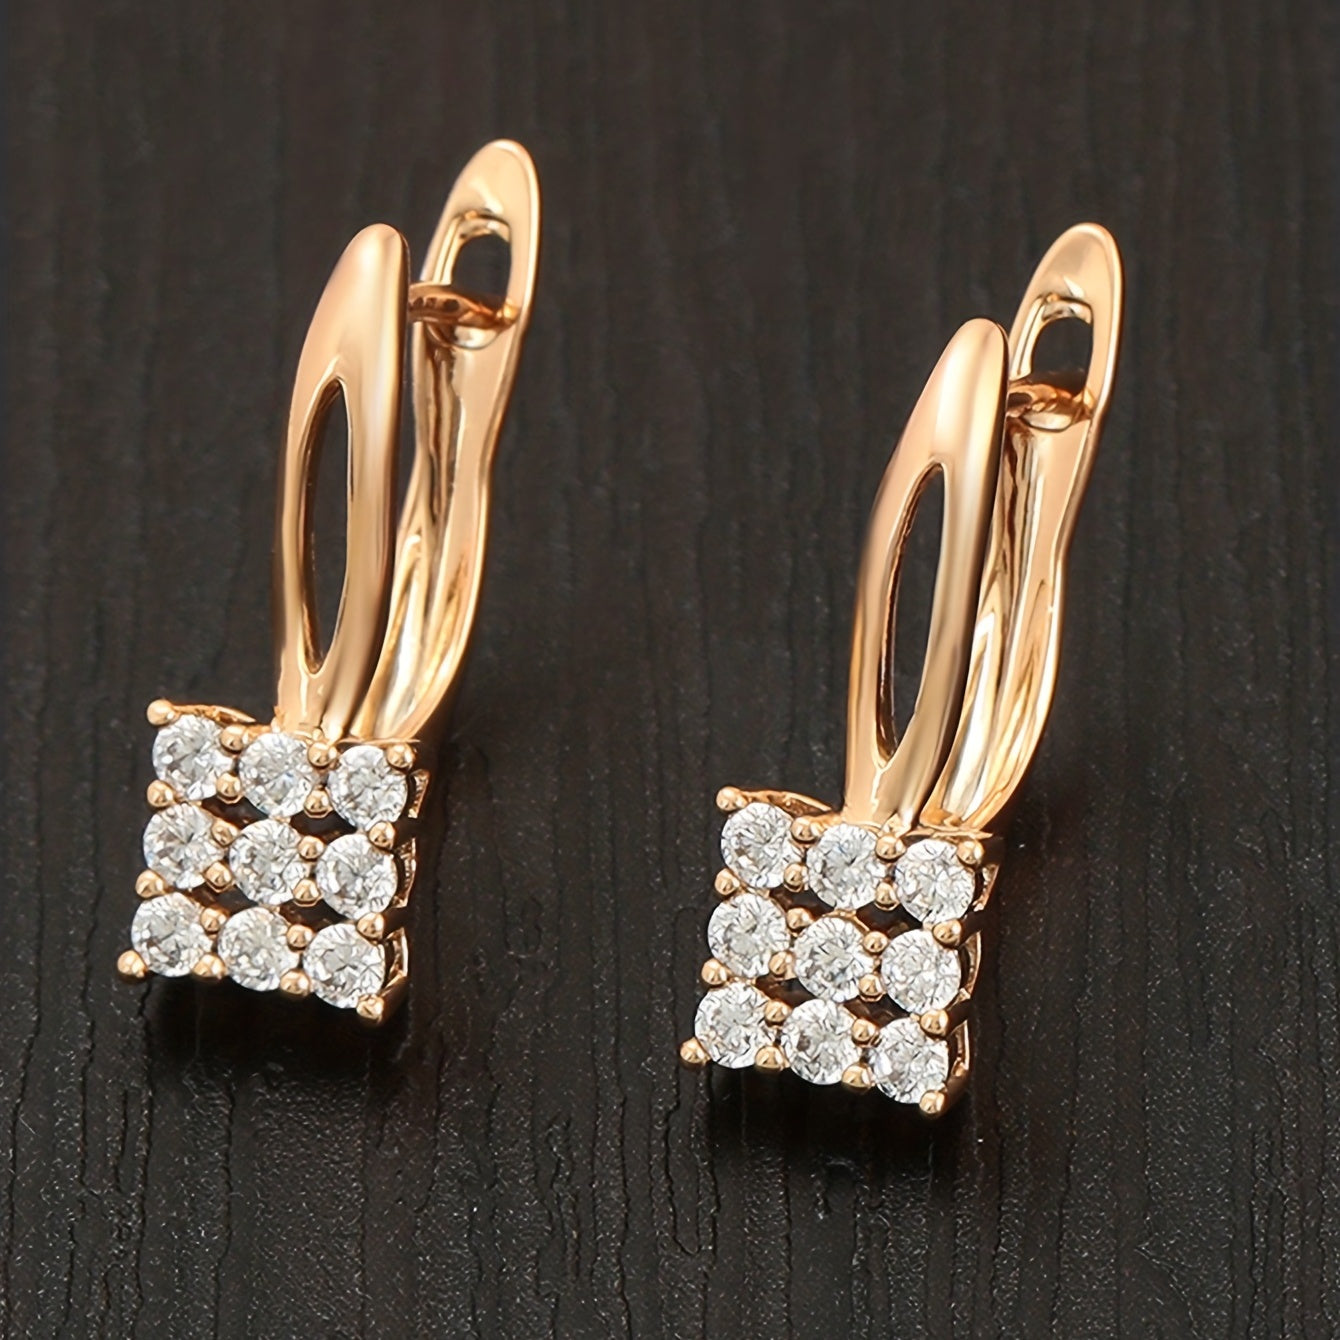 Luxurious 18K Gold Plated Rhombus Clip On Earrings - Perfect for Banquet Ornaments!